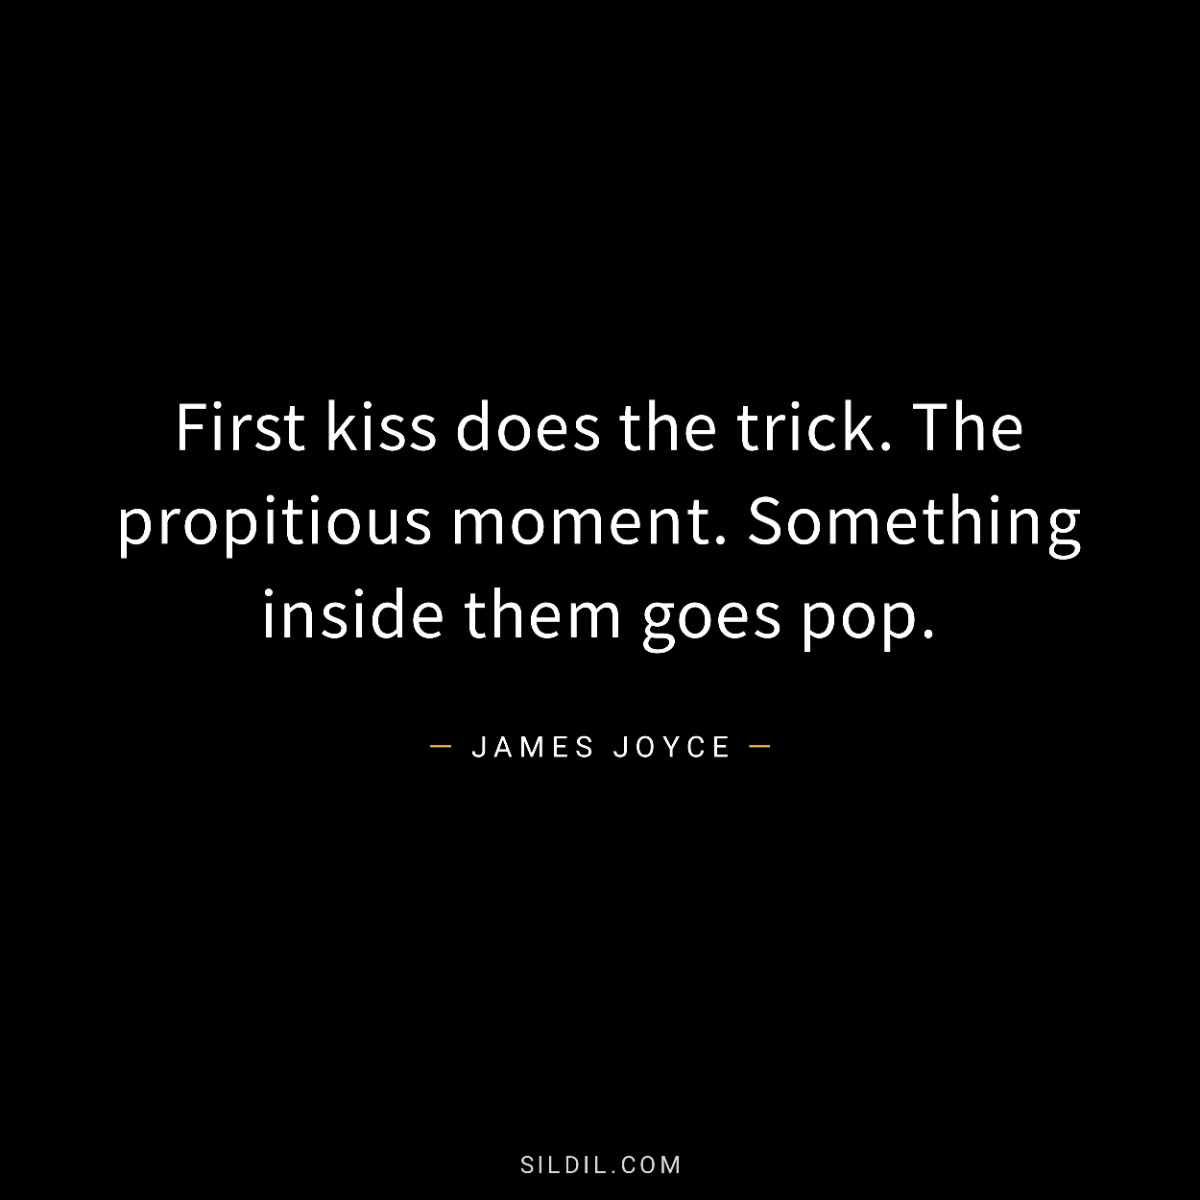 First kiss does the trick. The propitious moment. Something inside them goes pop.